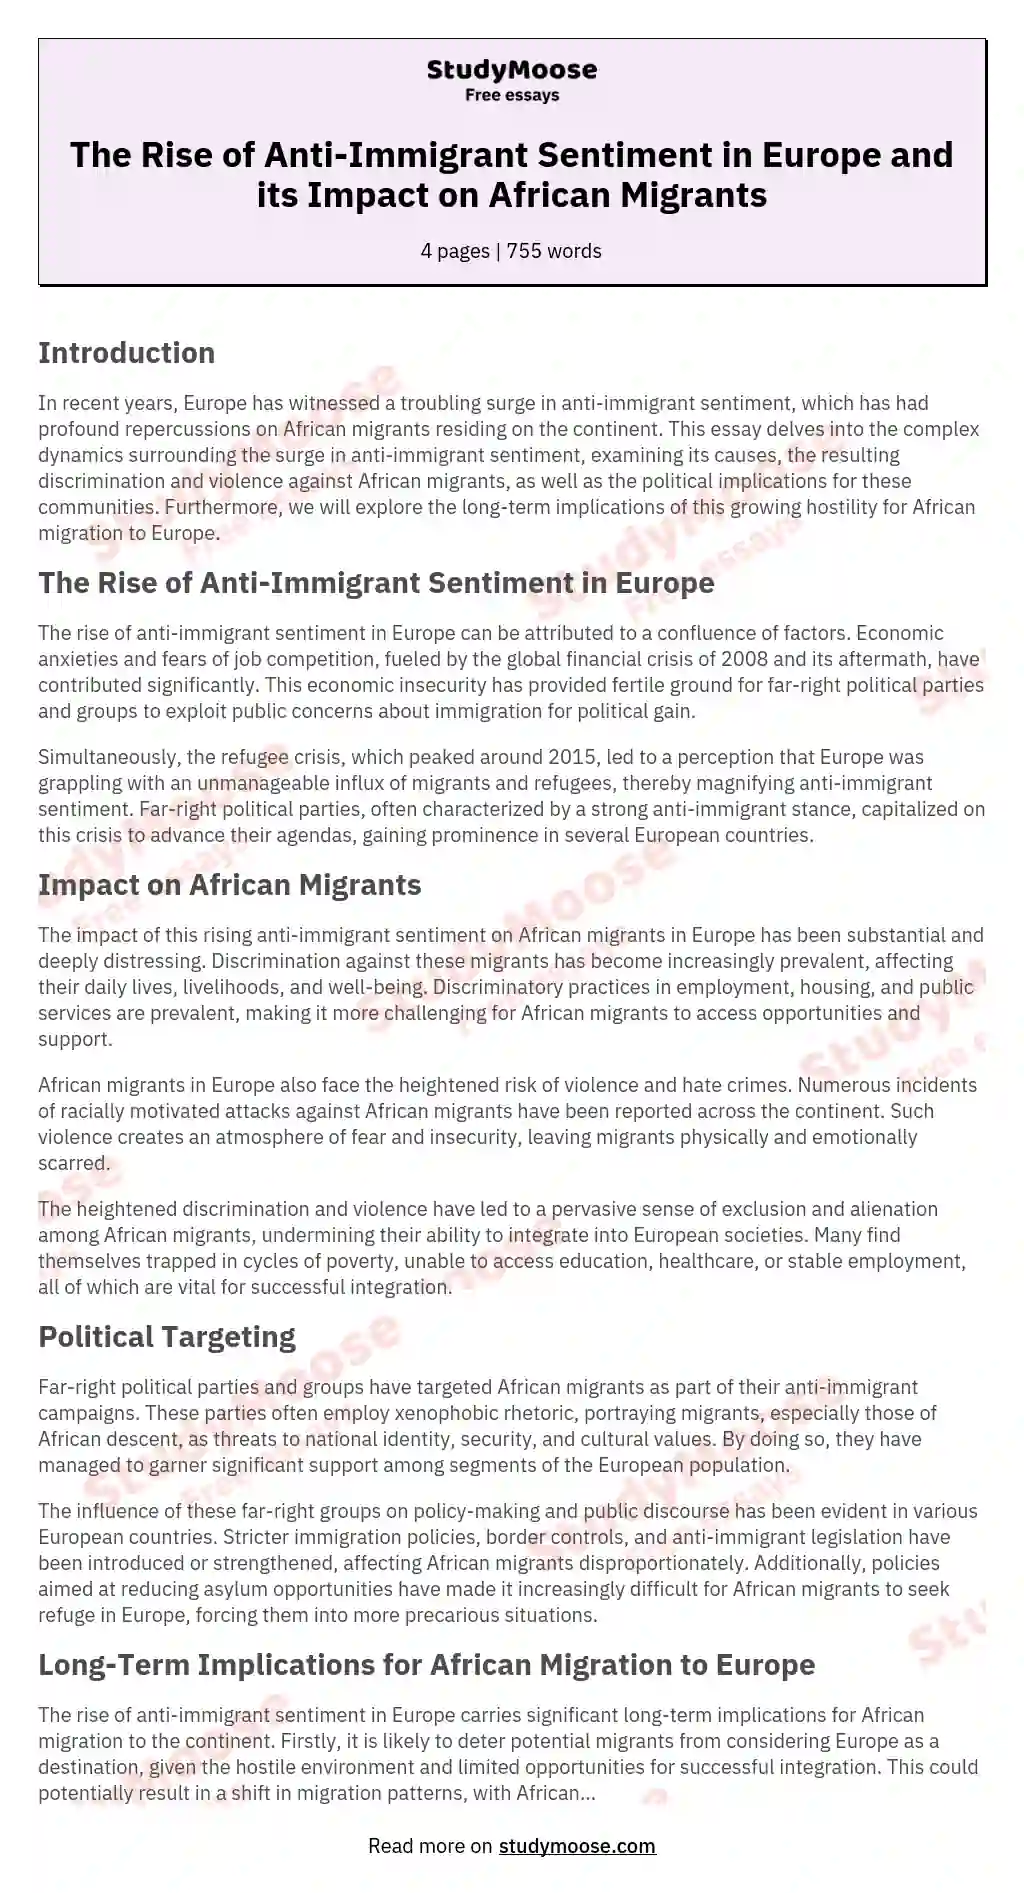 The Rise of Anti-Immigrant Sentiment in Europe and its Impact on African Migrants essay